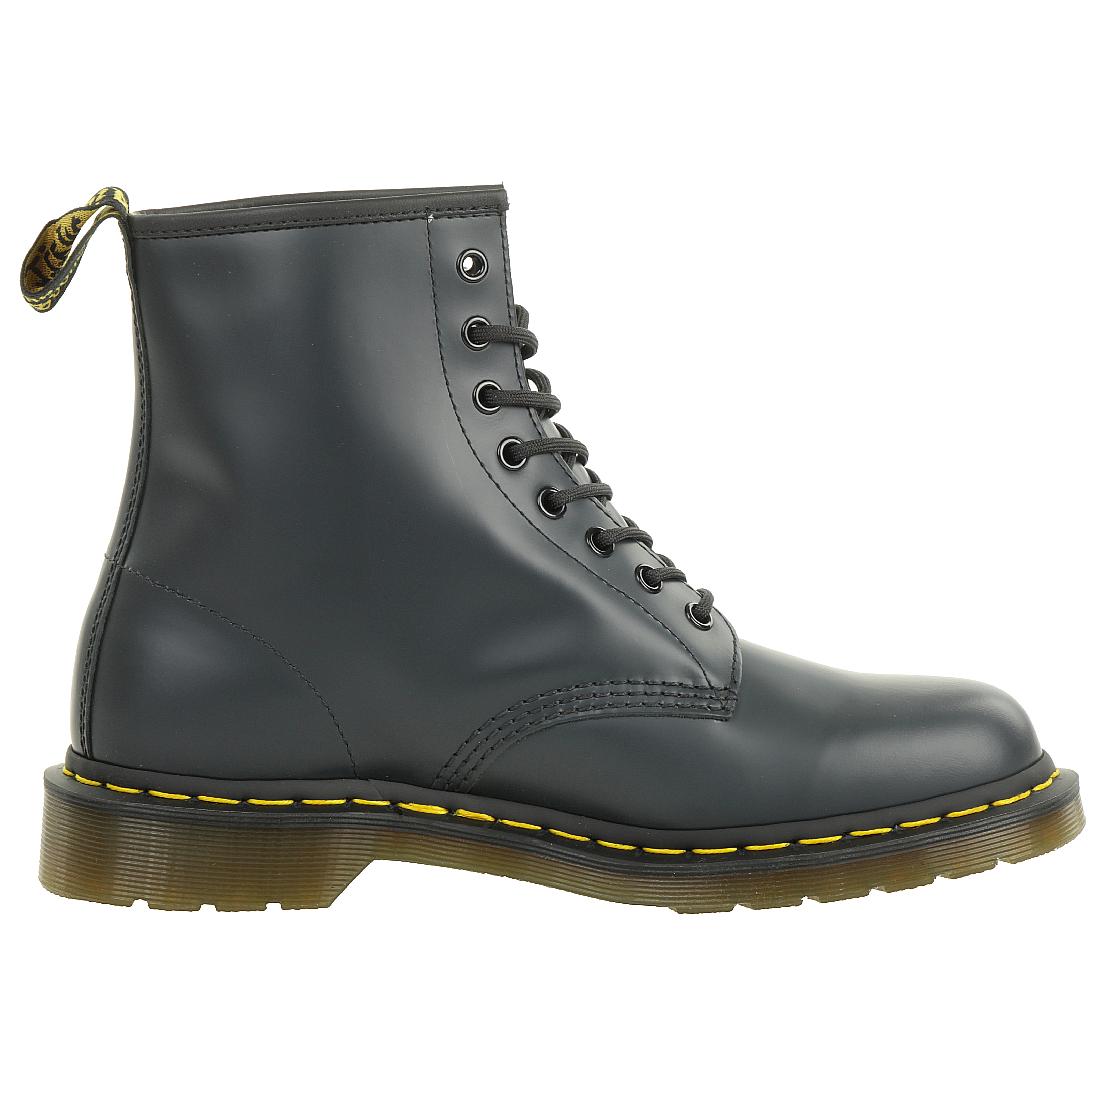 Dr. Martens 1460 Smooth Unisex Stiefel Boots Navy 10072410